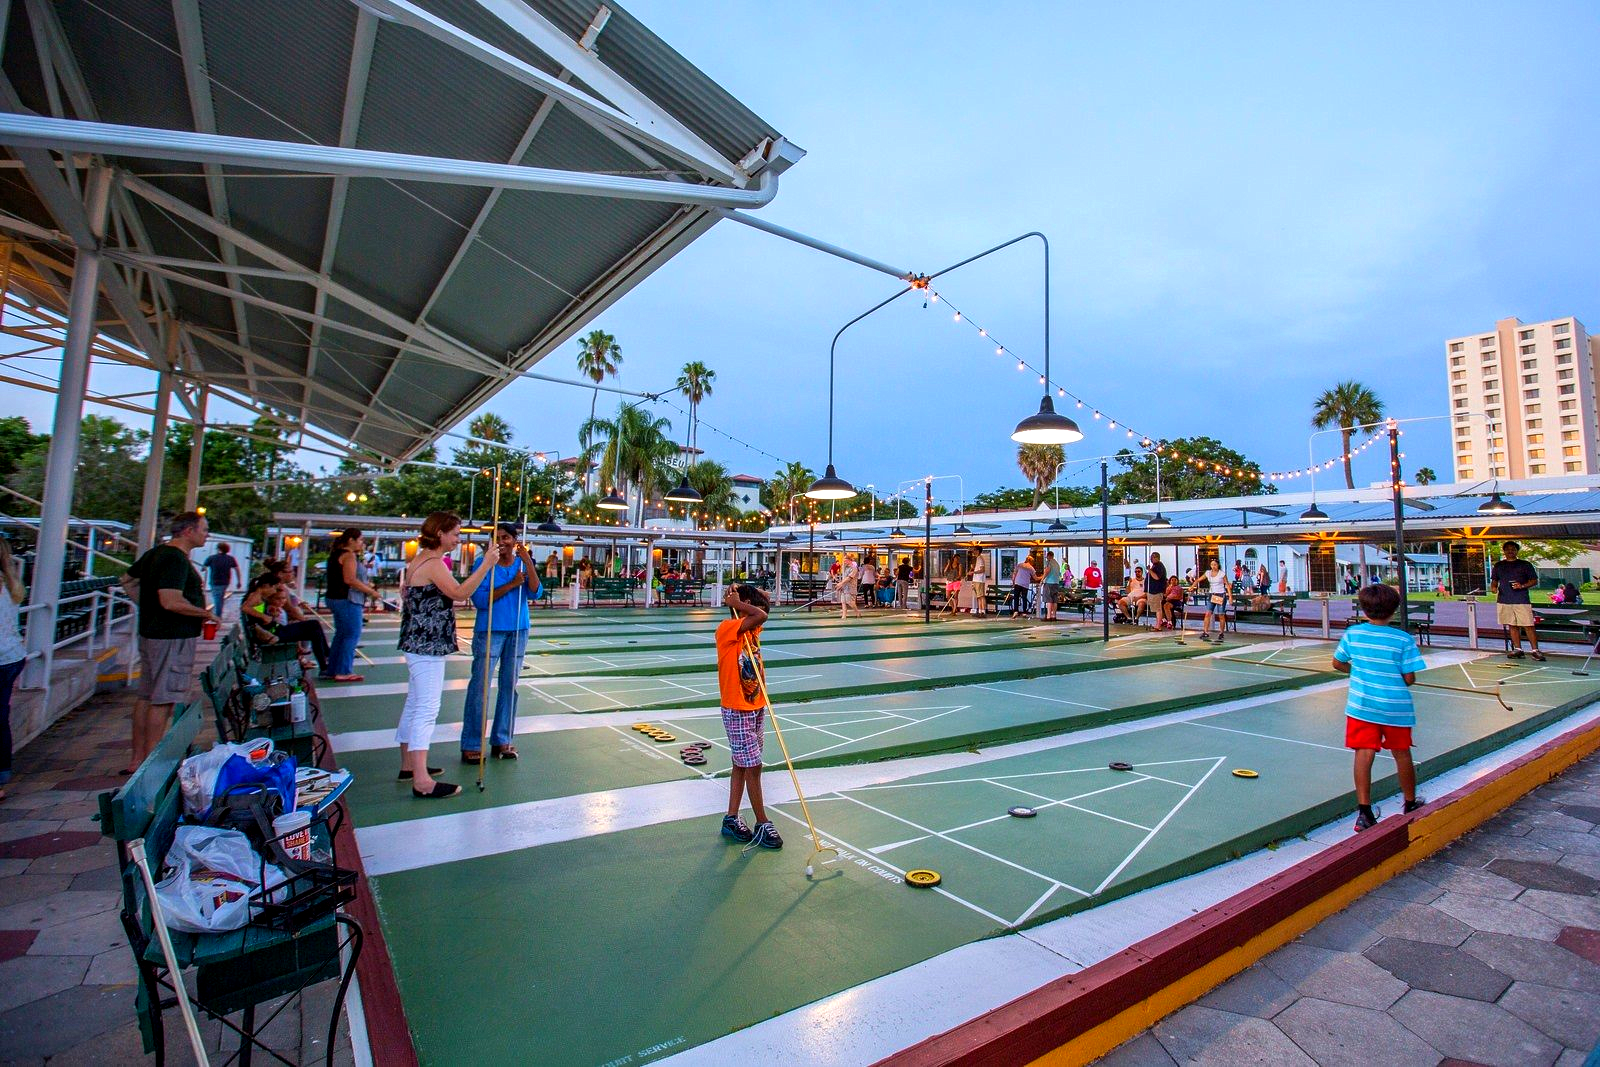 World's Largest Shuffleboard Club: world record in St. Petersburg, Florida